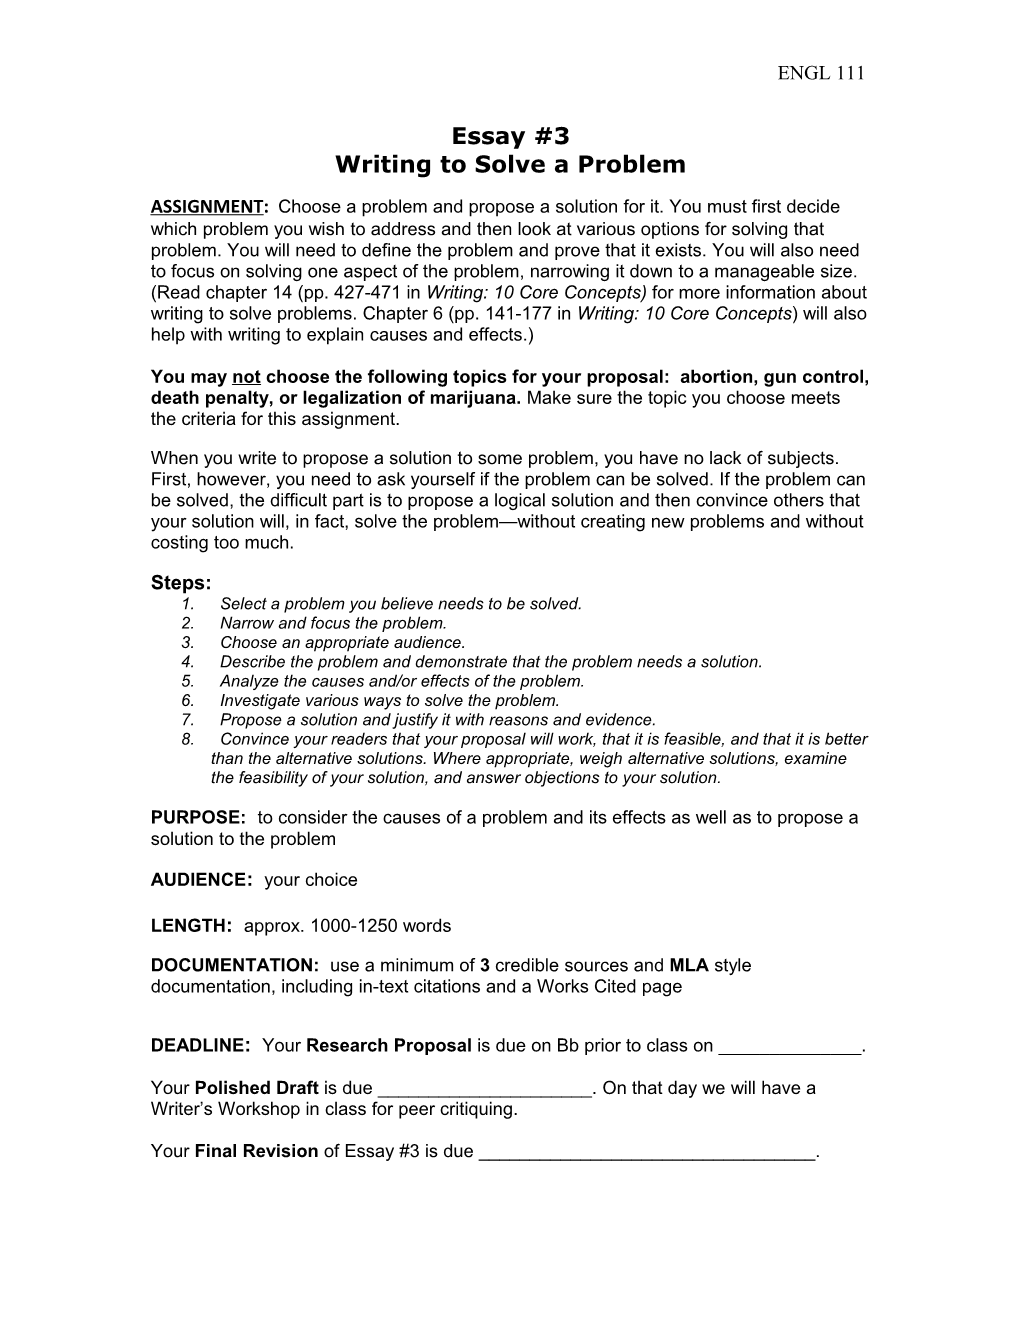 Writing to Solve a Problem